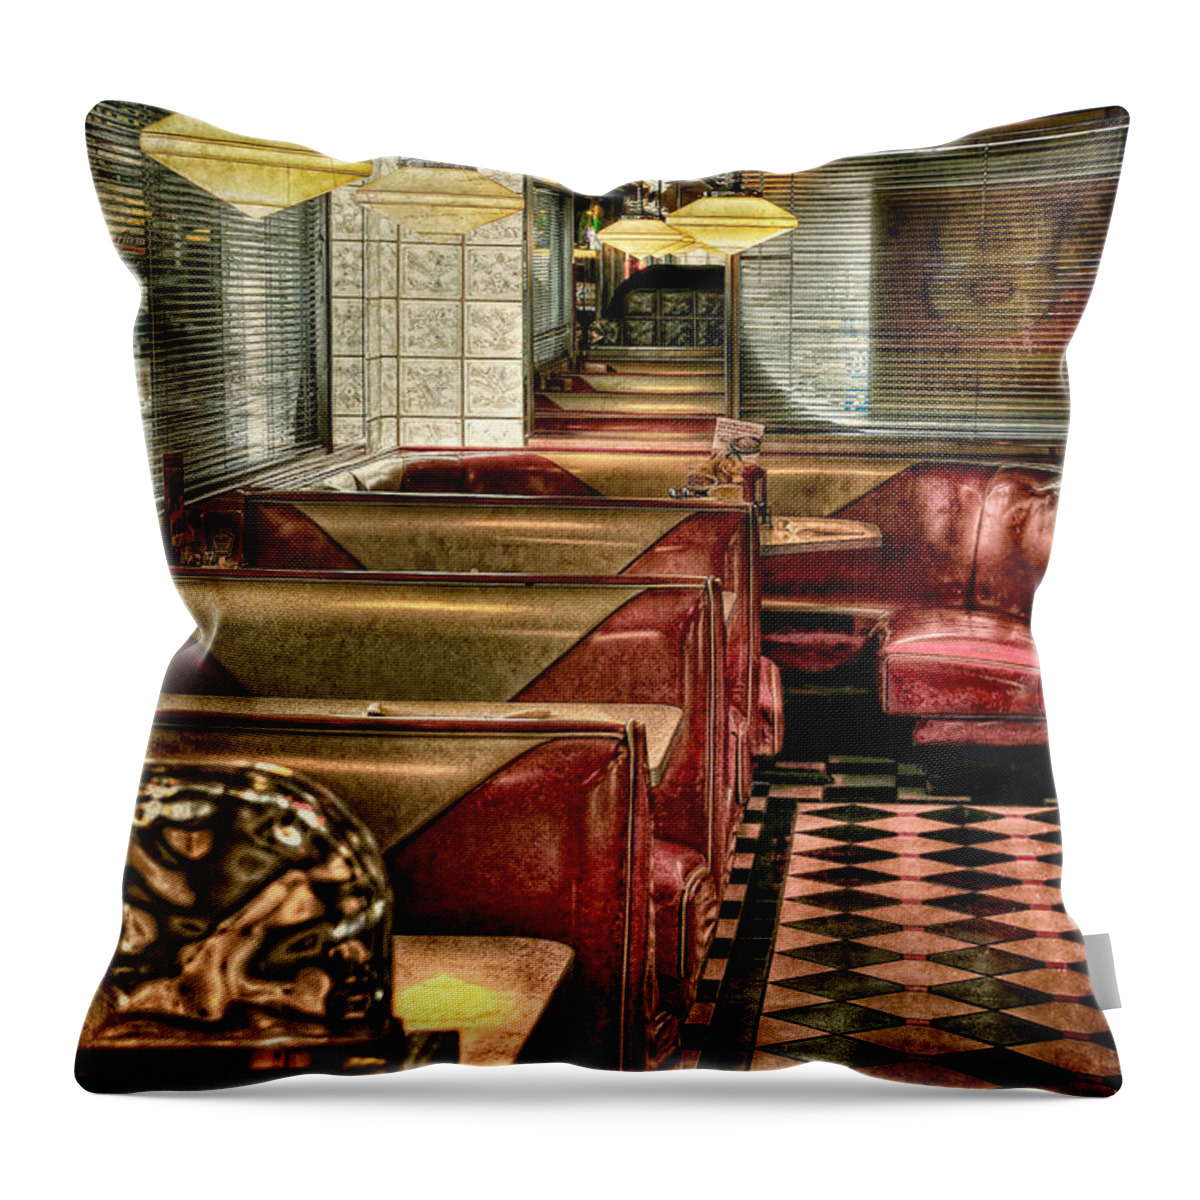 Diner Throw Pillow featuring the photograph Back To The Fifties by Lois Bryan